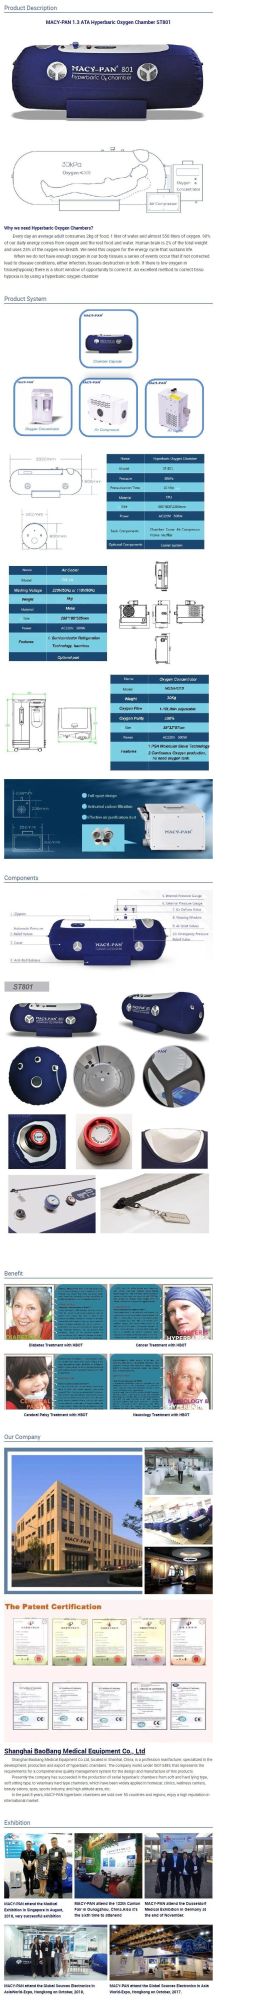 Customized Portable Hyperbaric Oxygen Chamber Rehabilitation Therapy Supplies